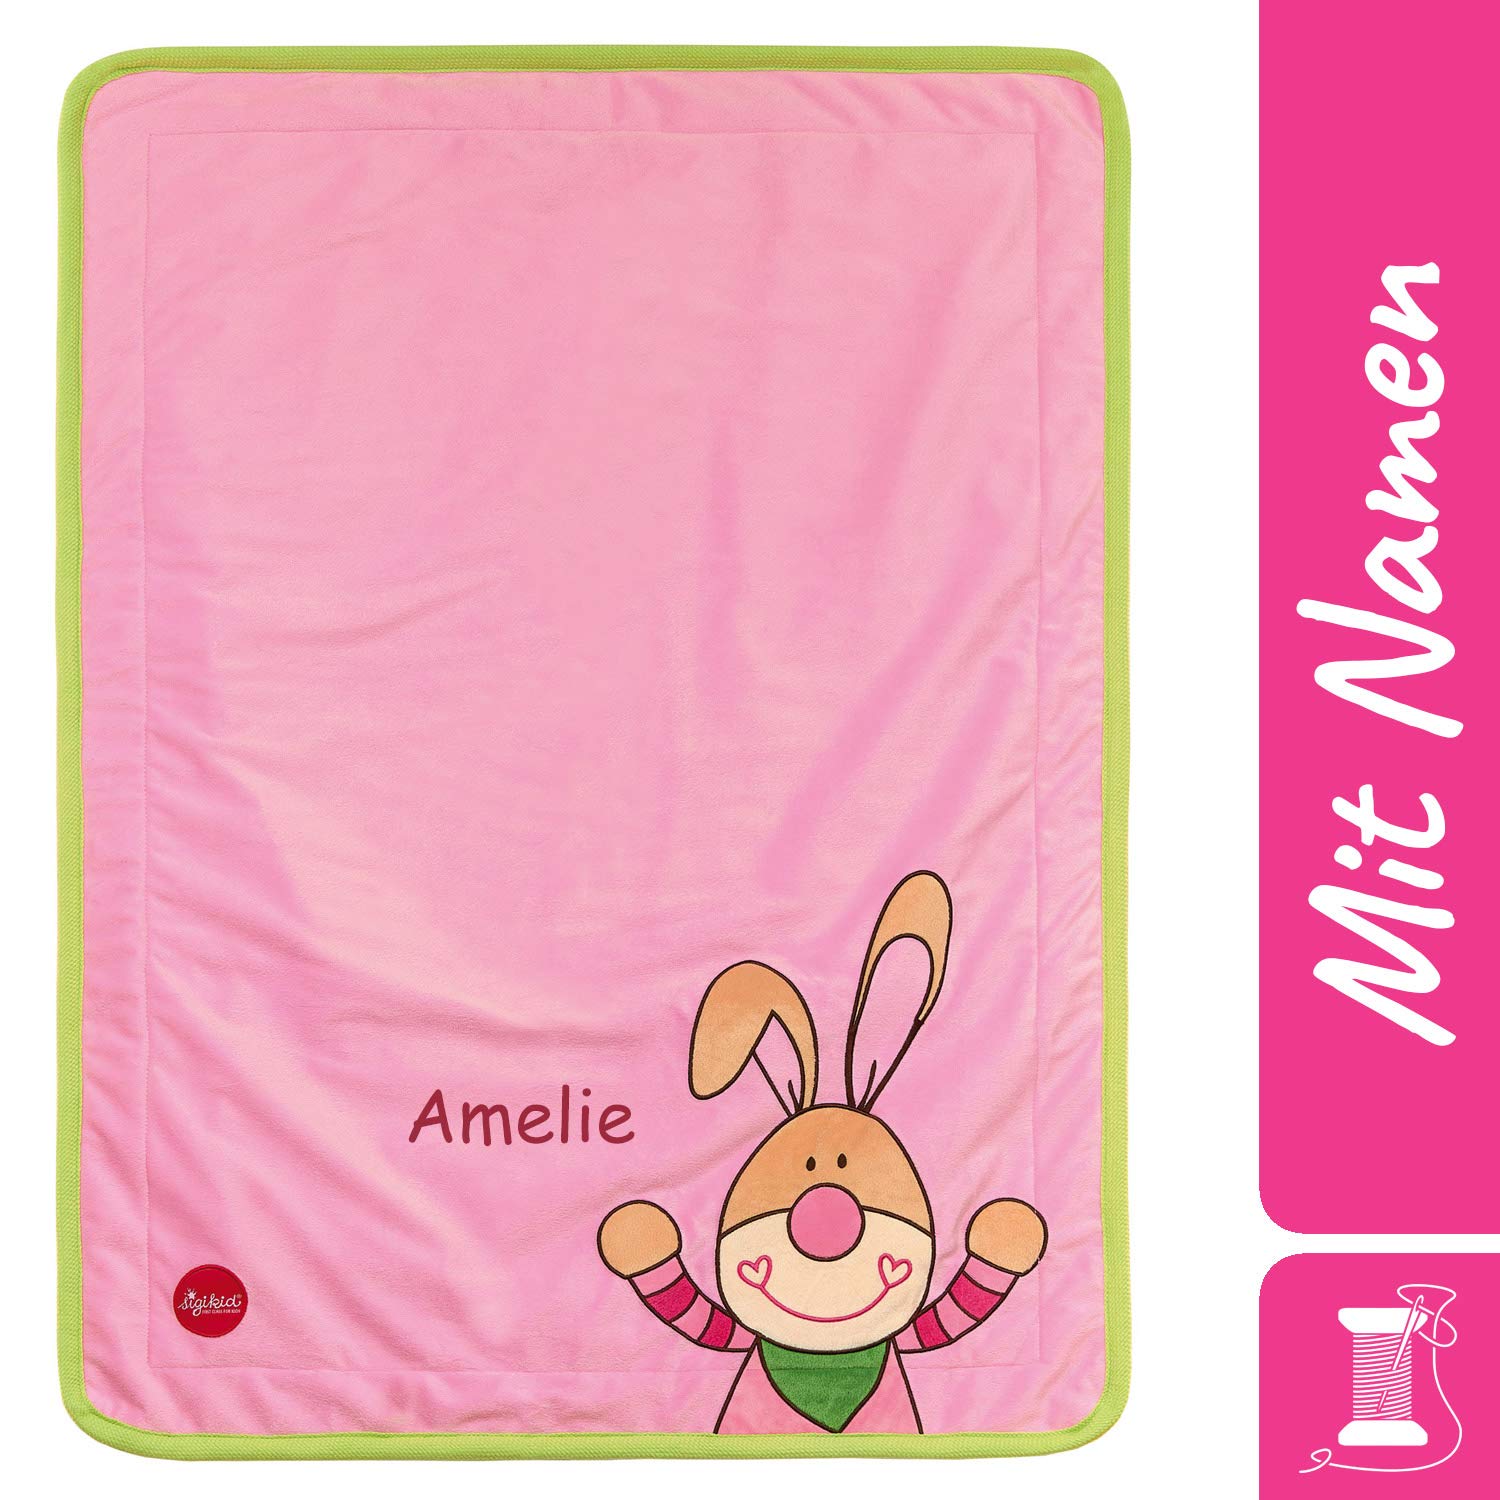 Sigikid 41558 Blanket Rabbit with Embroidered Name, Children\'s Cuddle Blanket Personalised 75 x 100 cm, Girls, Baby Gifts, Pink/Green